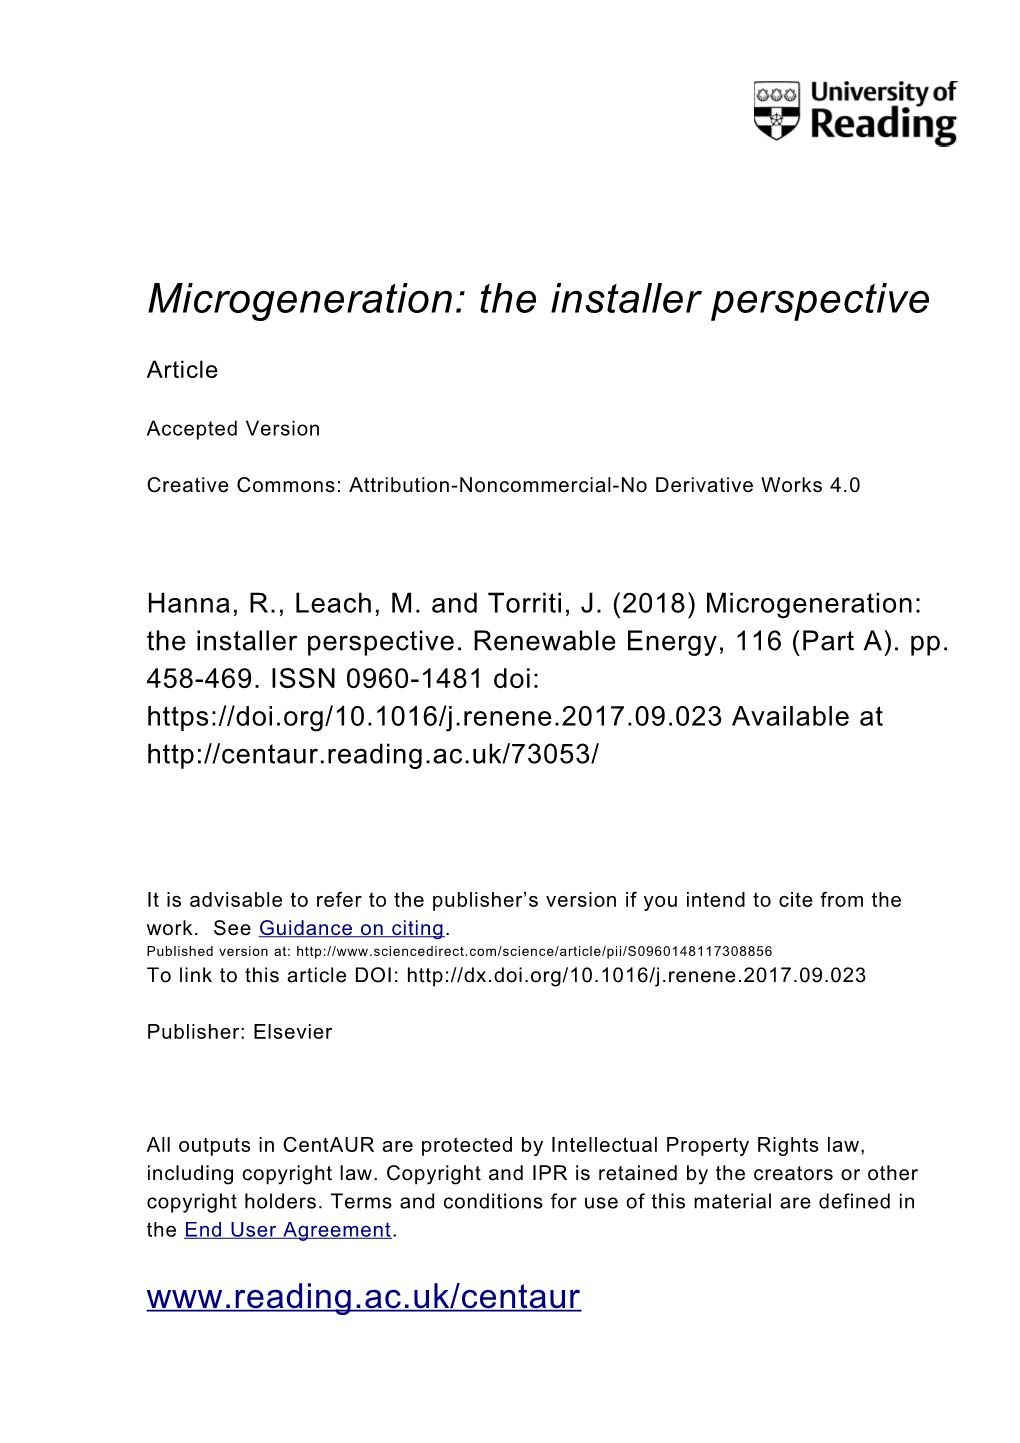 Microgeneration: the Installer Perspective